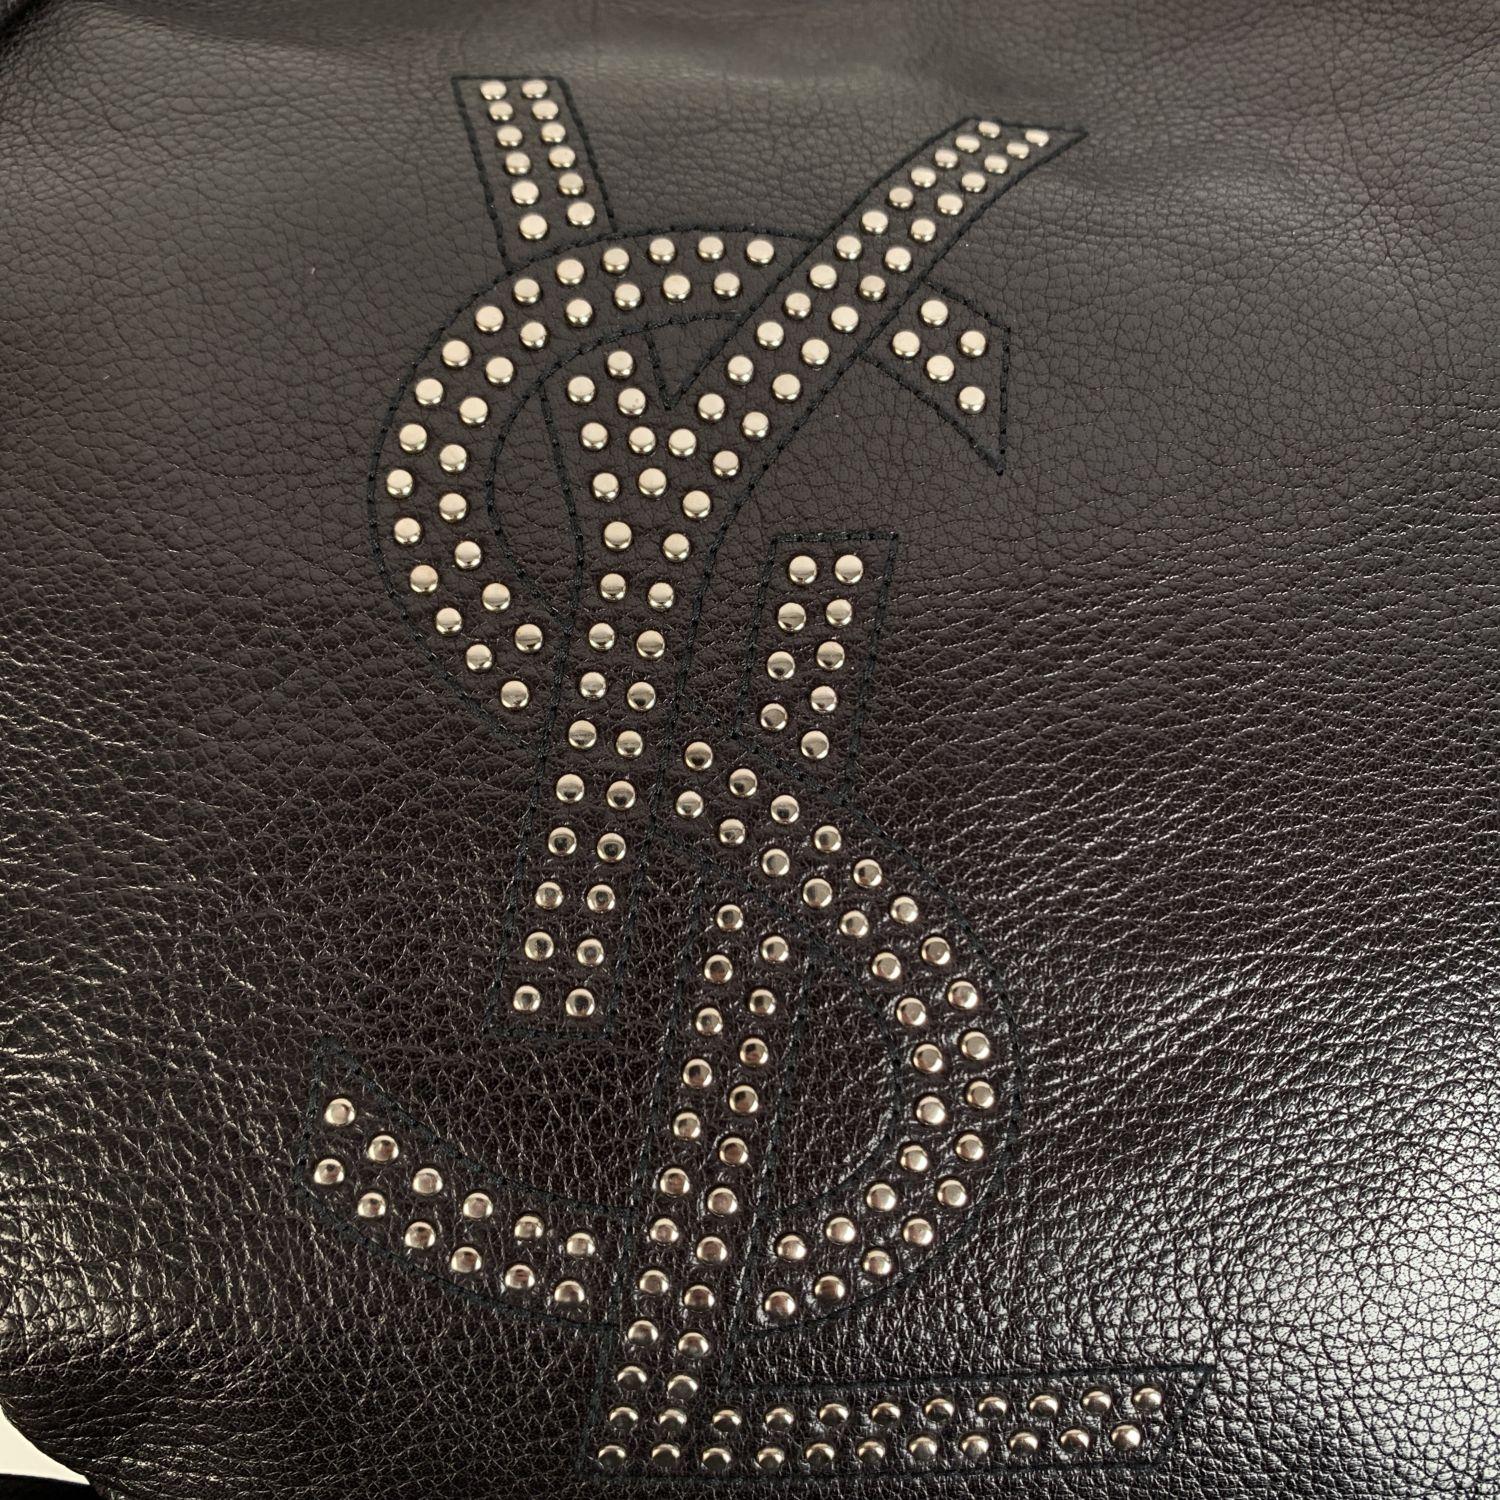 Yves Saint Laurent Mombasa bag in black leather. Designed in 2001 byTom Ford for Yves Saint-Laurent, the MOMBASA Bag was mentioned on the Wall Street Journal like a 'case-history' of successful business. It features a horn handle, obtained from a